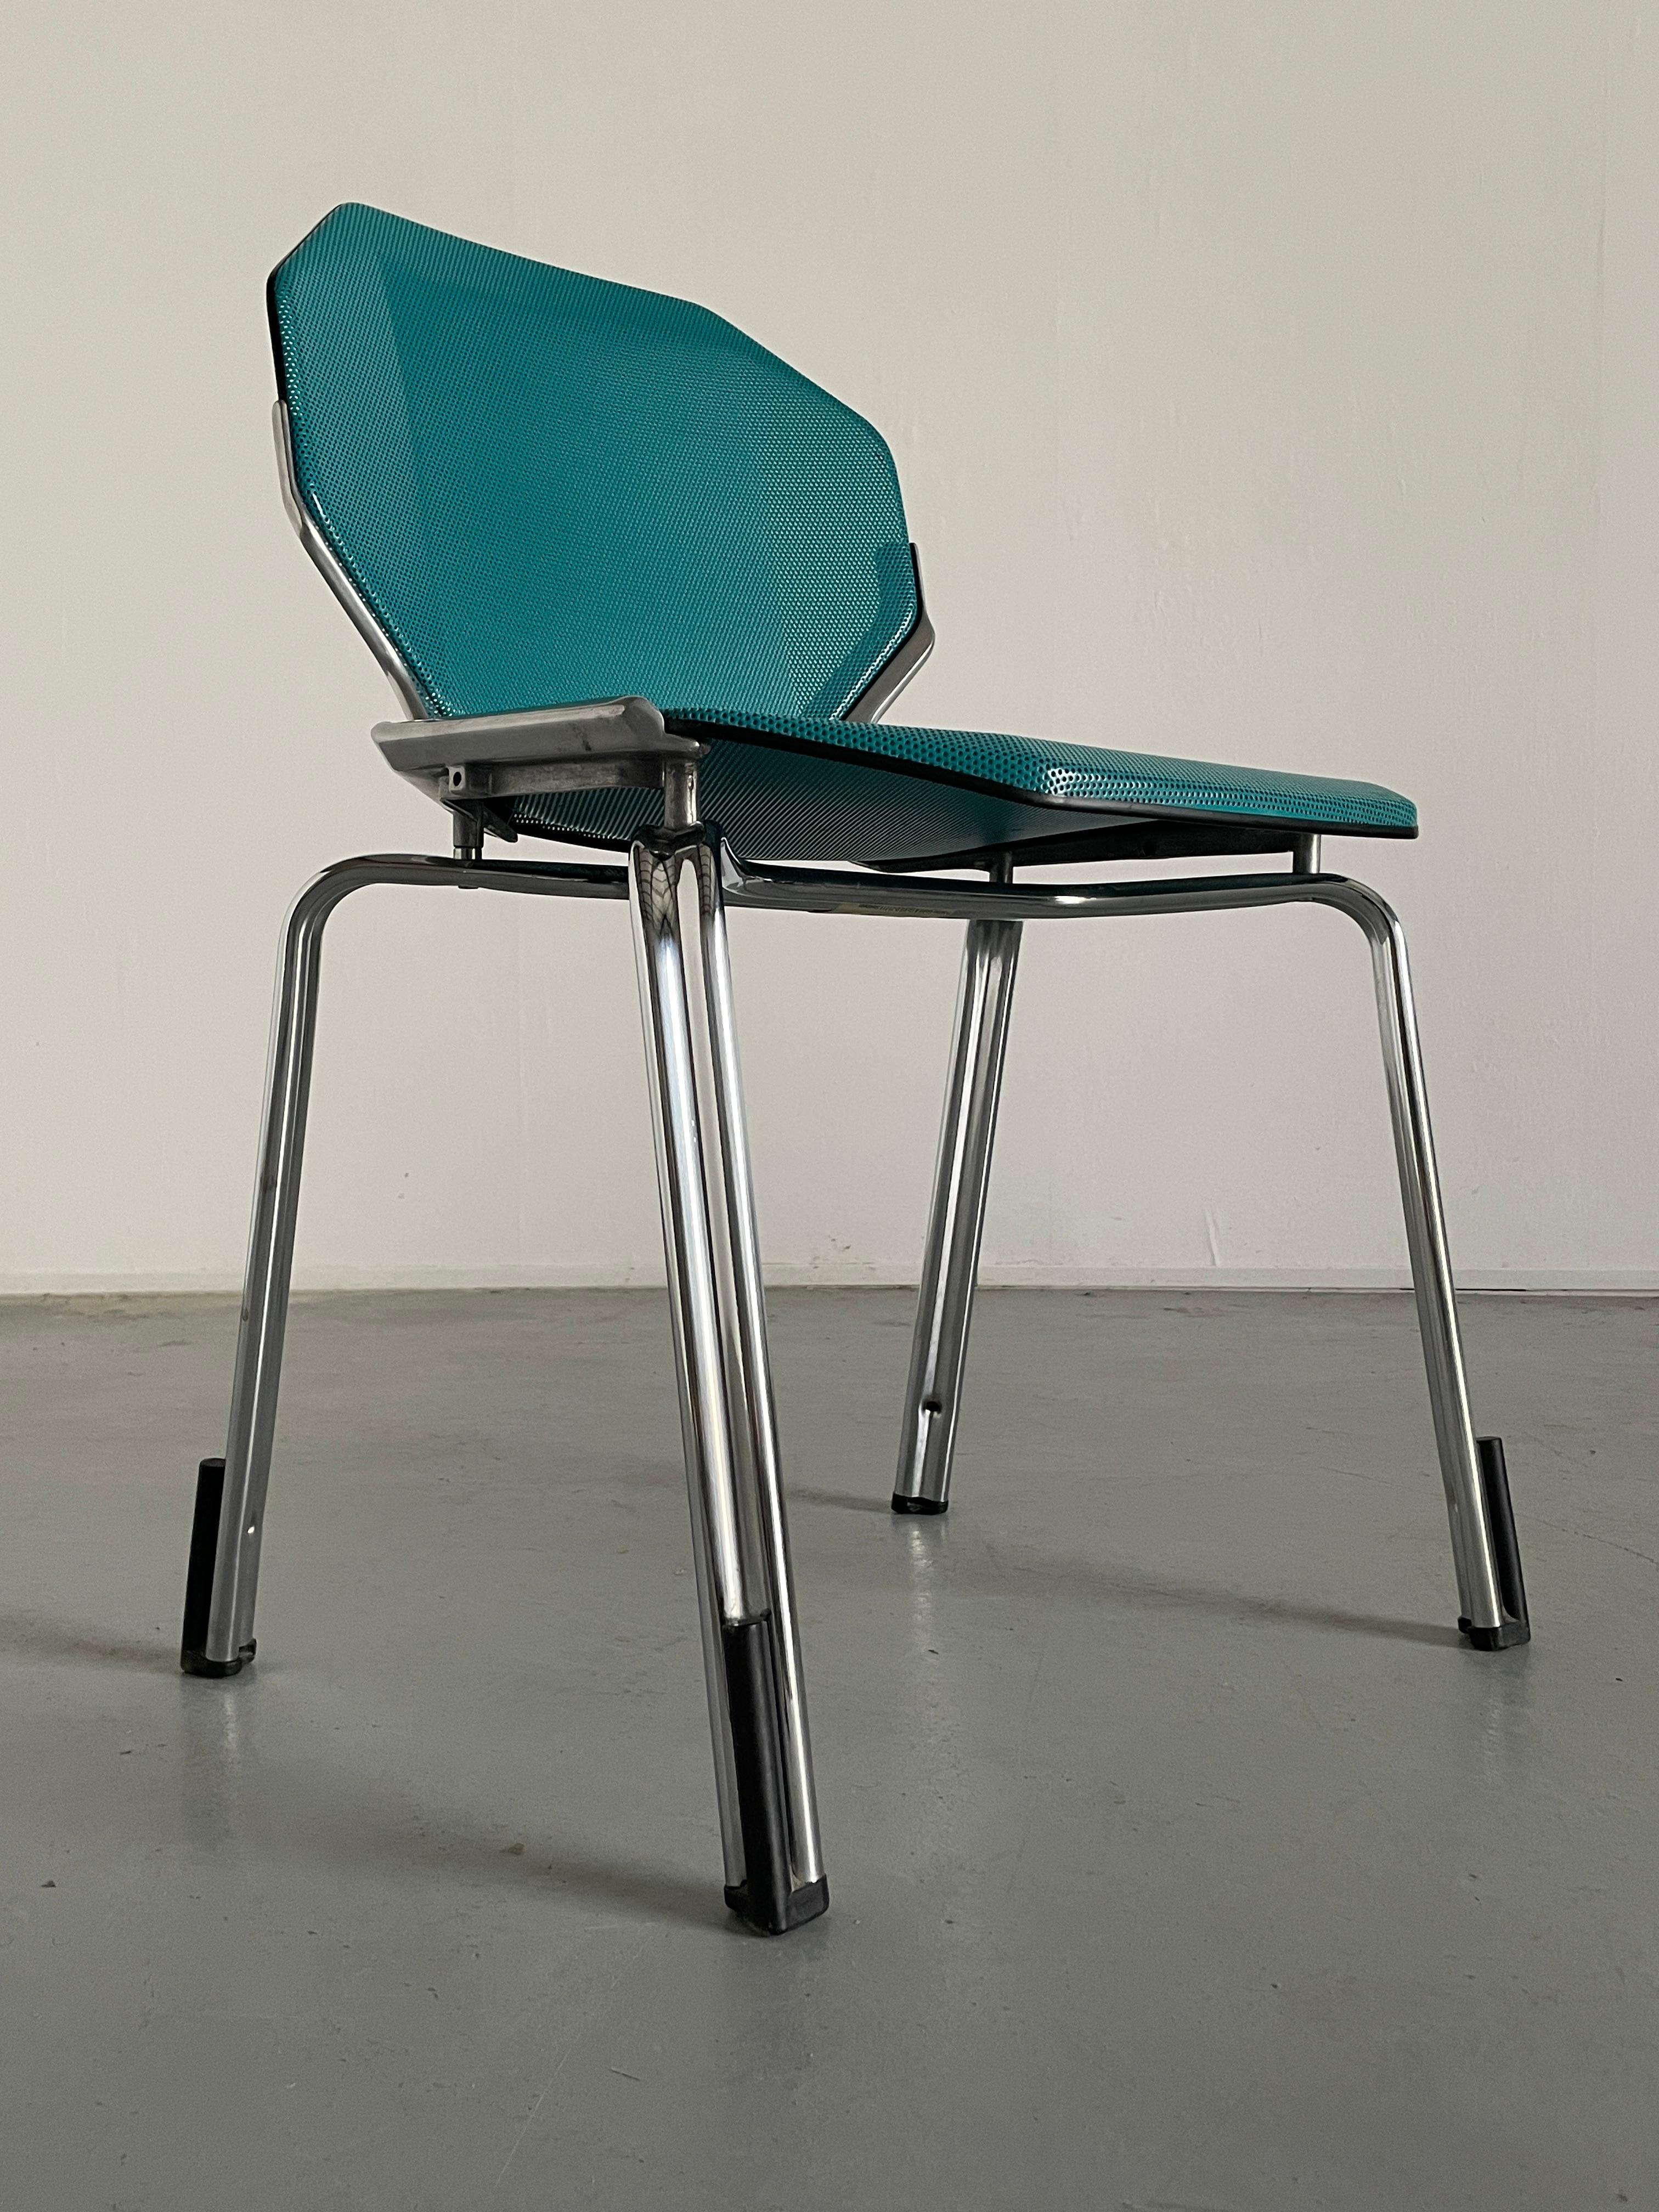 Space Age Futuristic Octagonal Stackable Dining Chairs by Fröscher Sitform, 90s For Sale 5